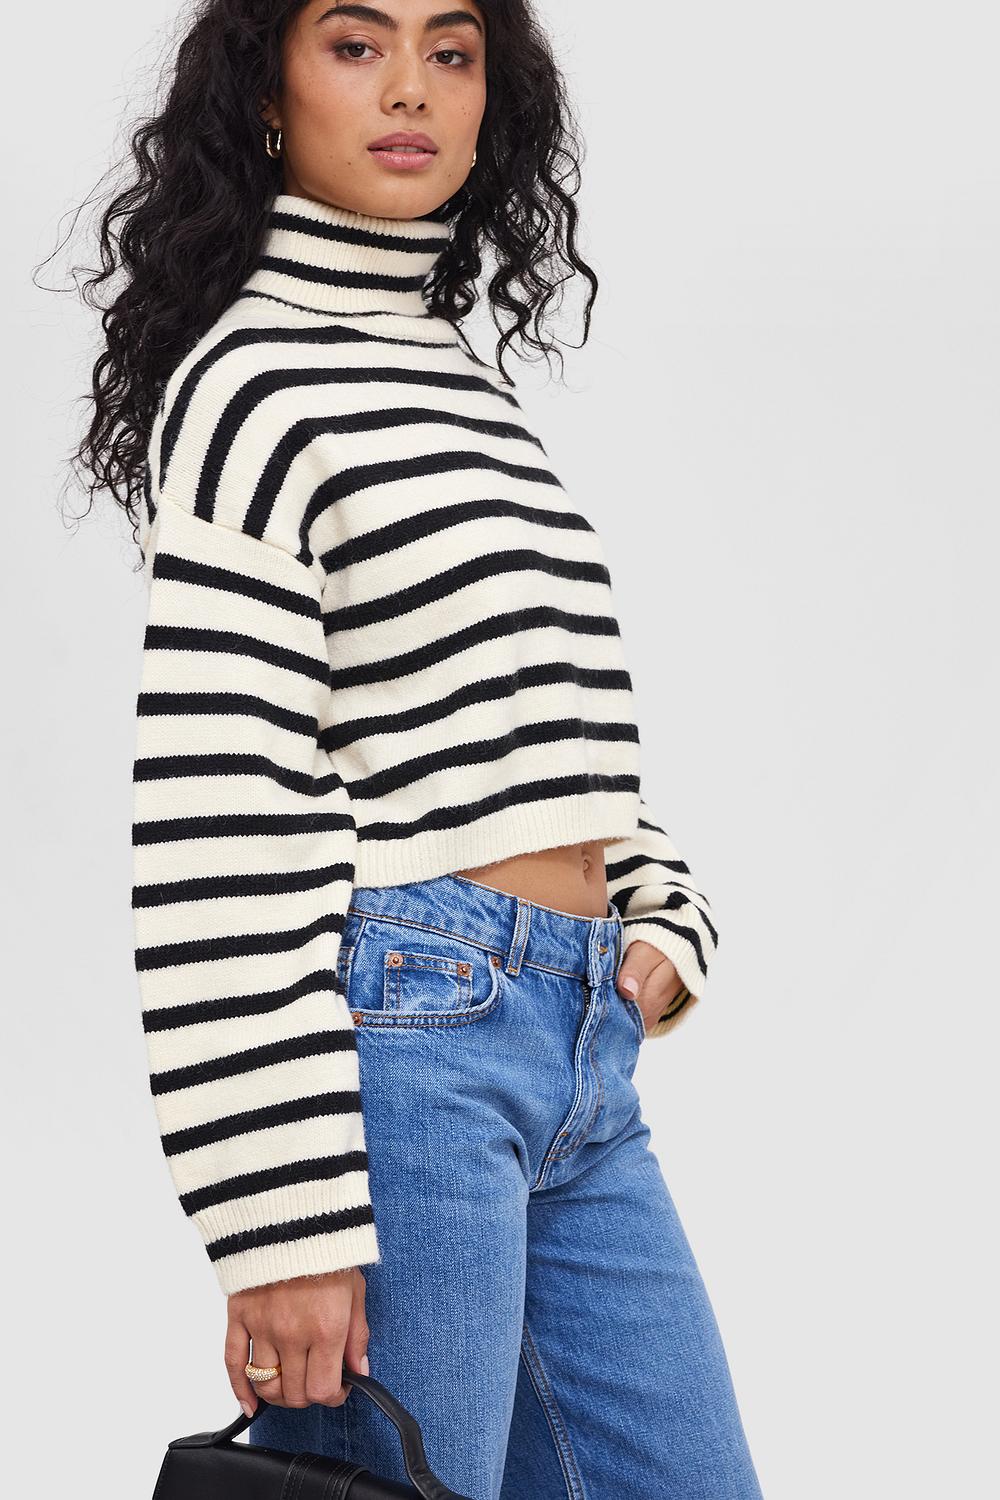 Offwhite jumper with stripes